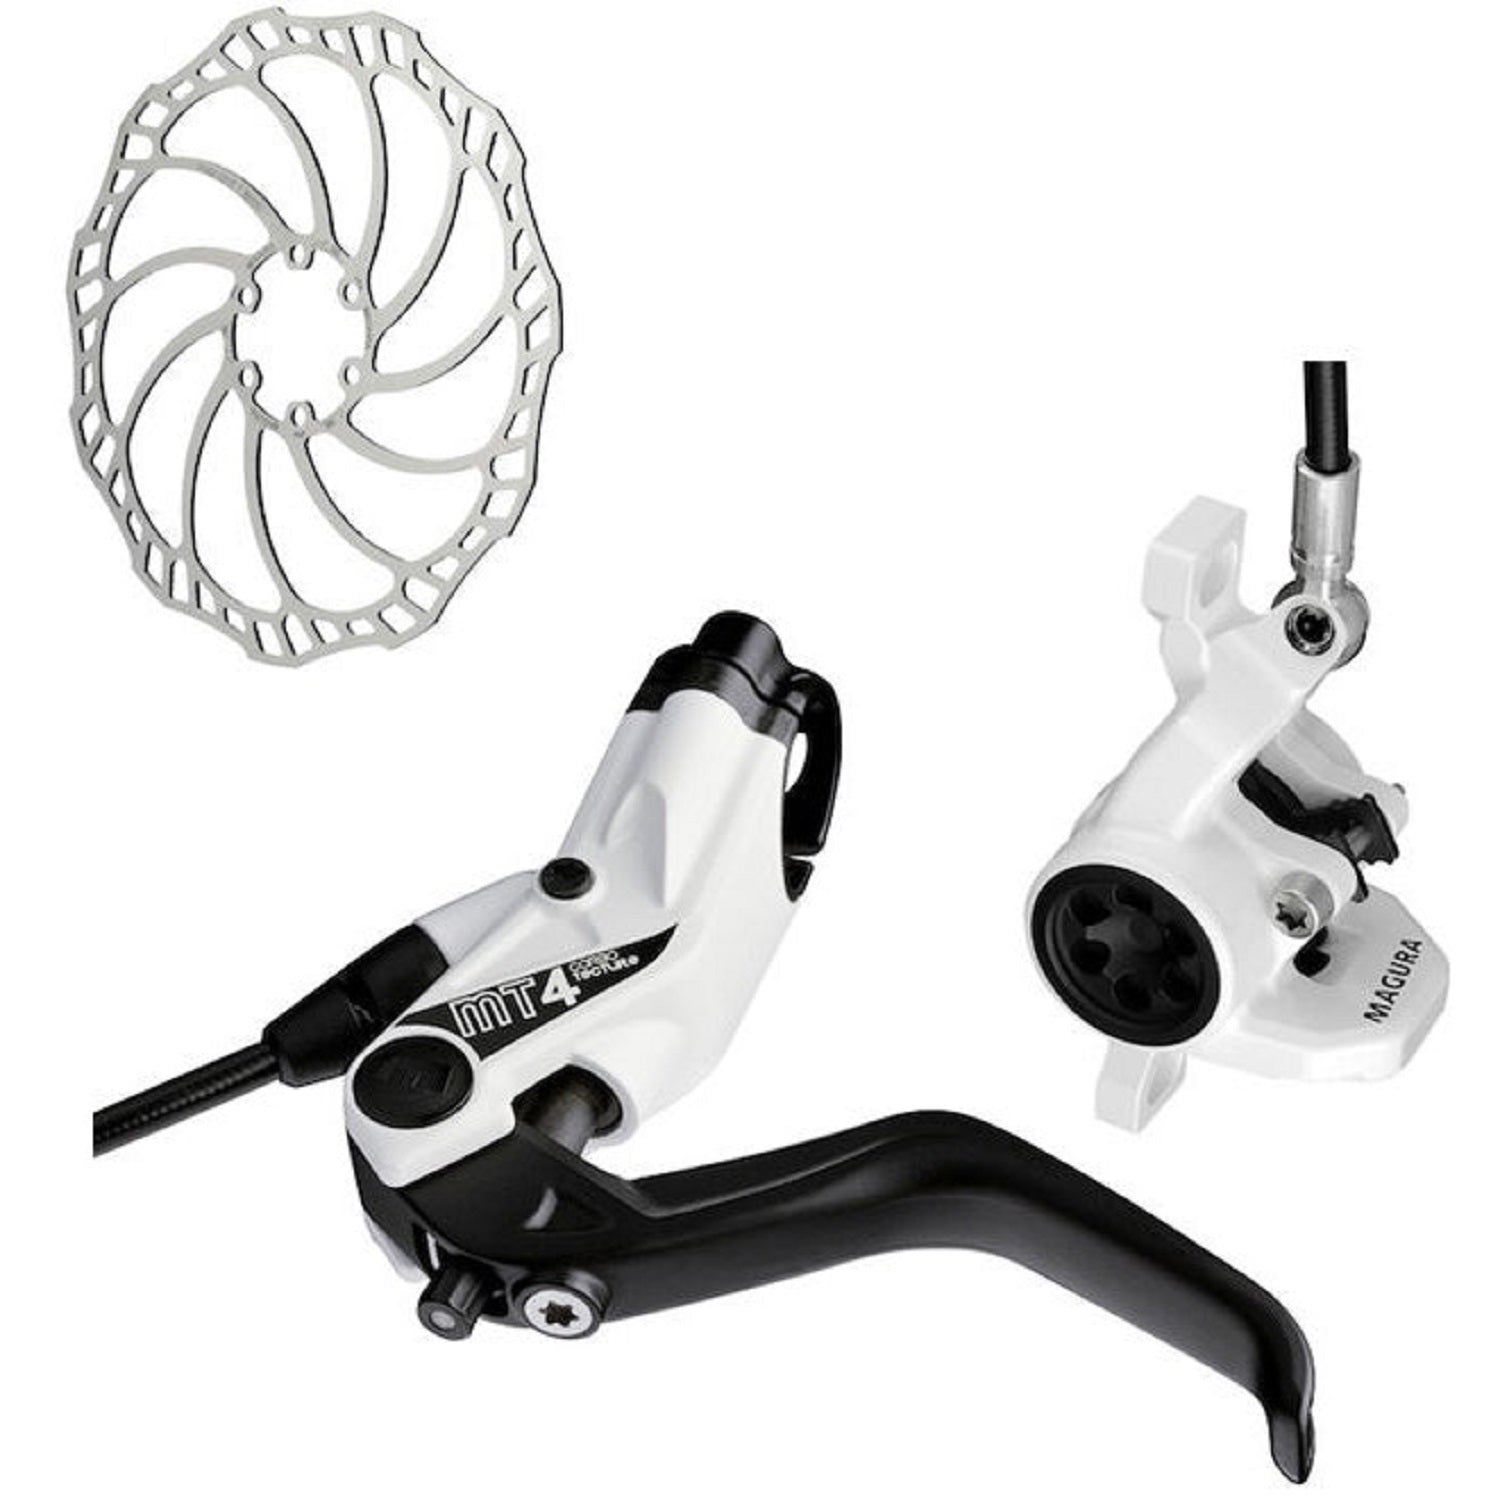 Magura Brake System MT4 Storm 160 F/L (PM) and R/R (IS